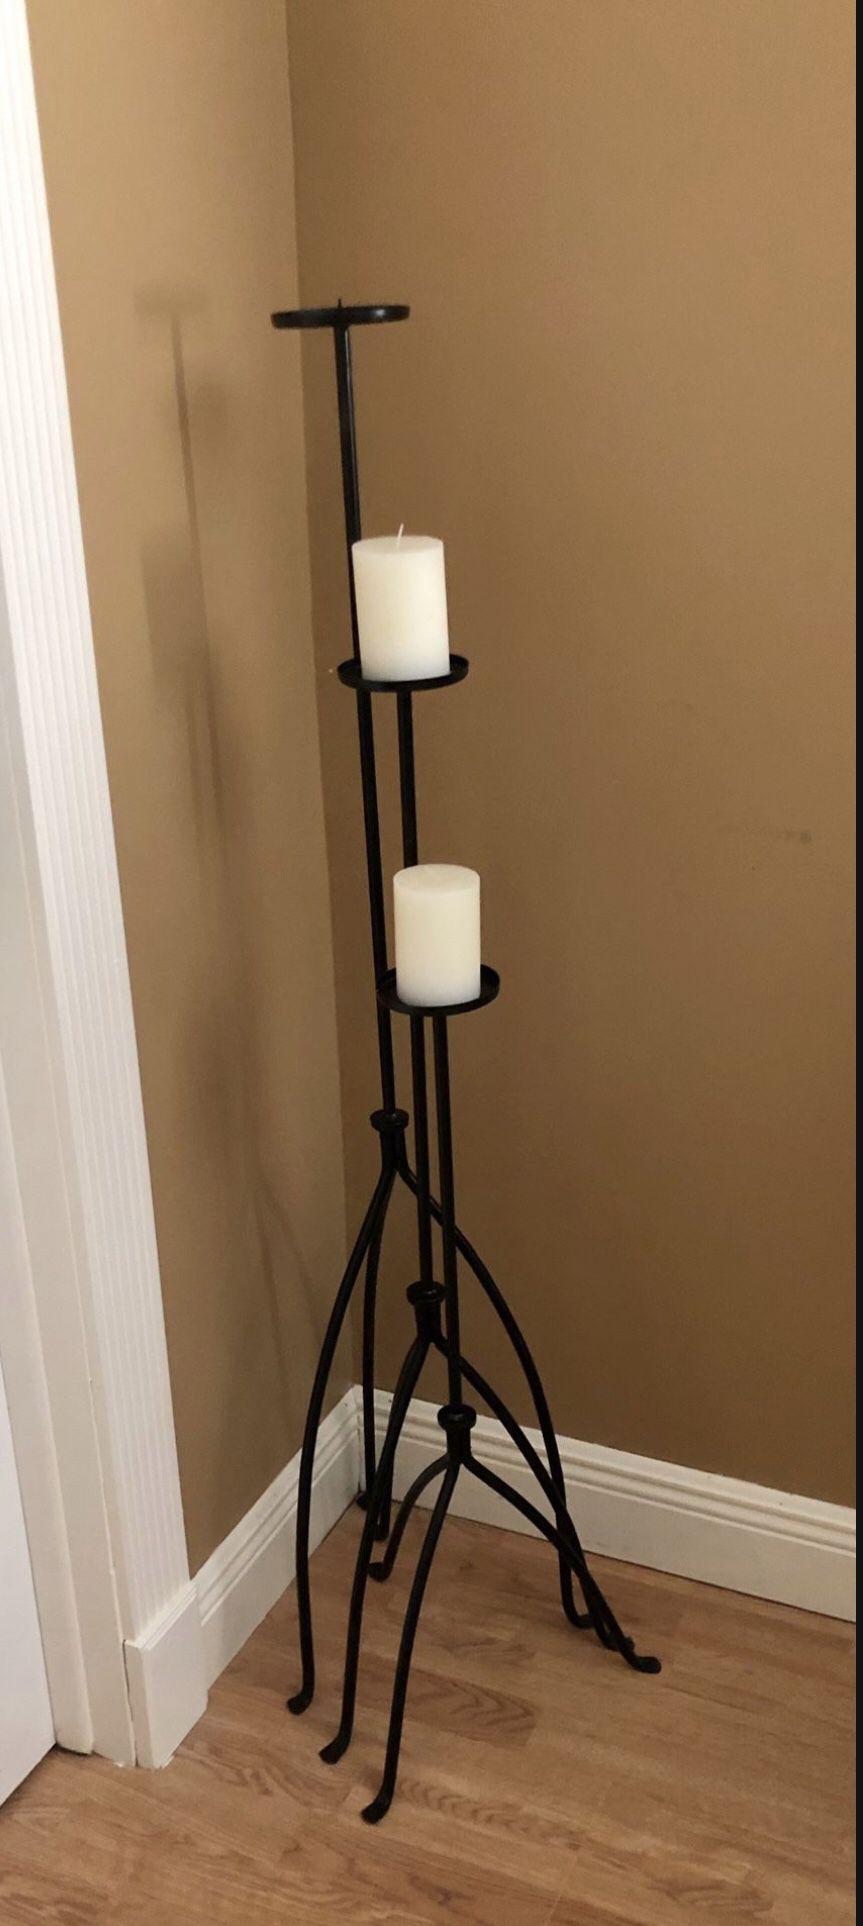 Set of 3 Floor Black Wrought Iron Floor Candlesticks- Standing Stacked Candle Stands